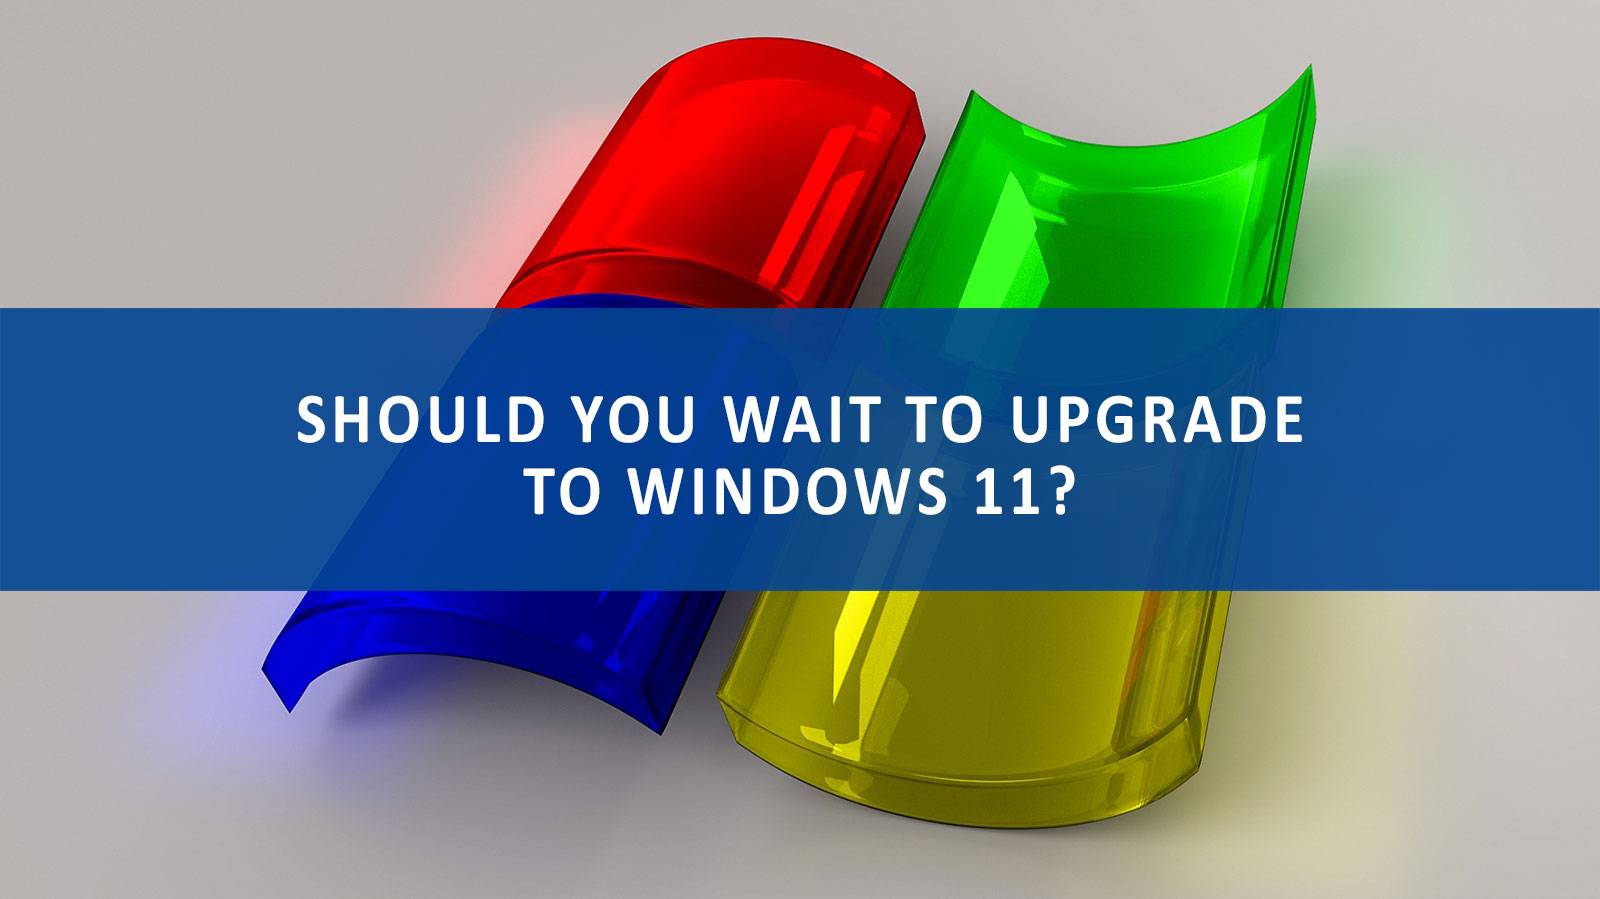 3d graphic of the Windows logo illustrating the need to wait to upgrade to Windows 11